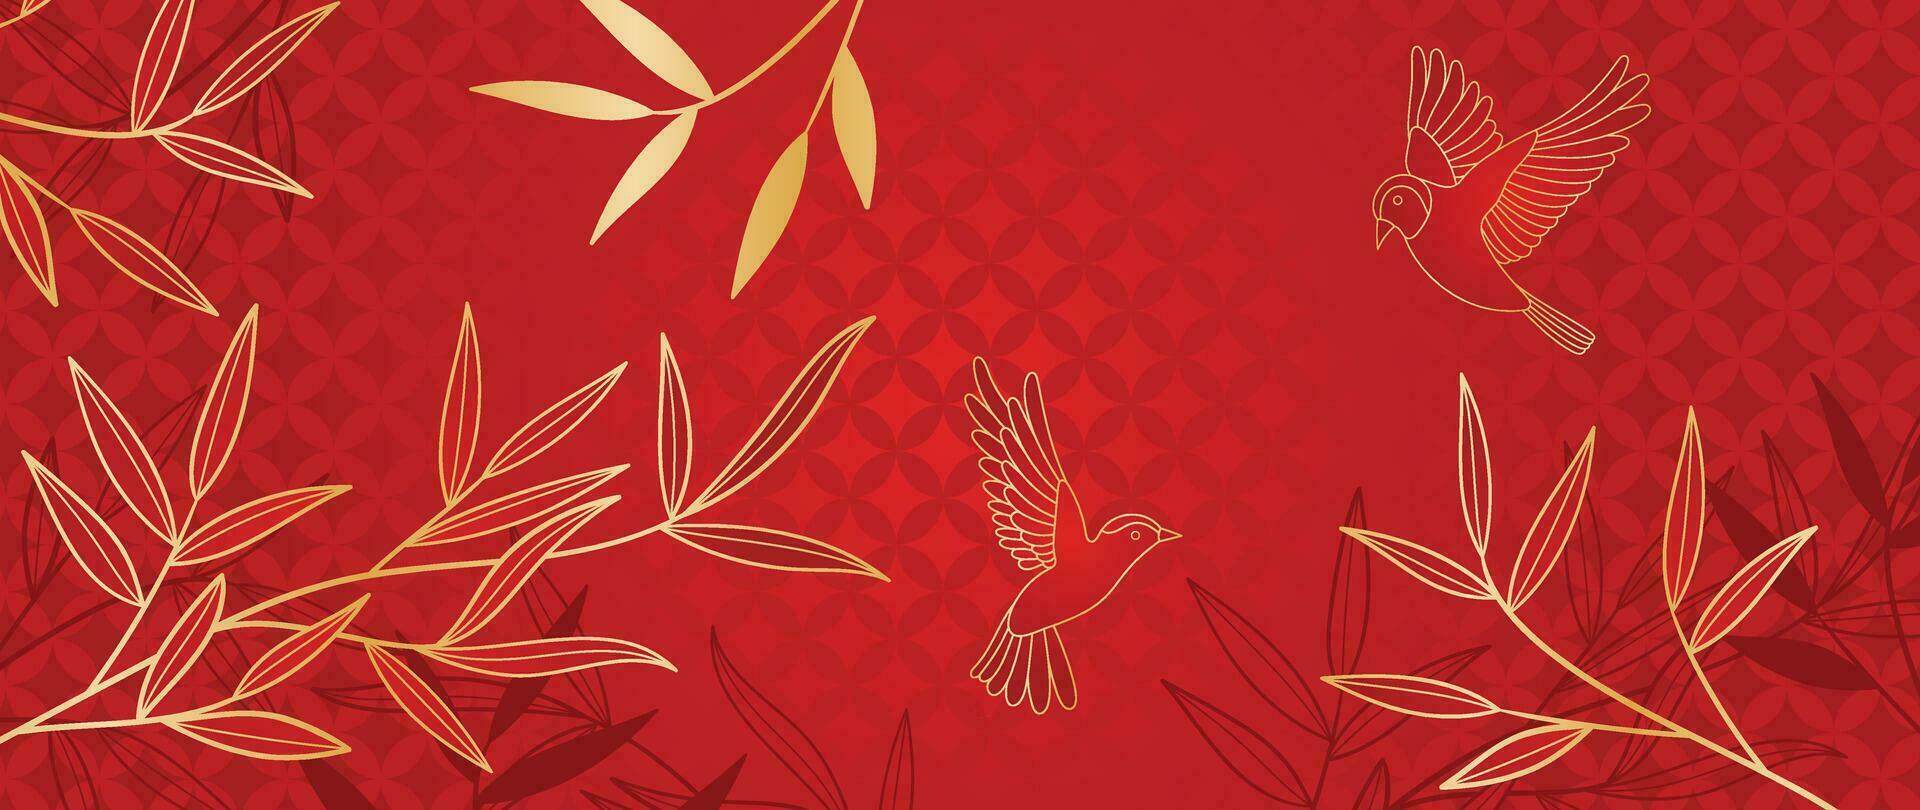 Elegant Chinese oriental pattern background vector. Elegant swallow bird and bamboo leaves branch golden line art on red background. Design illustration for happy new year, wallpaper, banner, card. vector